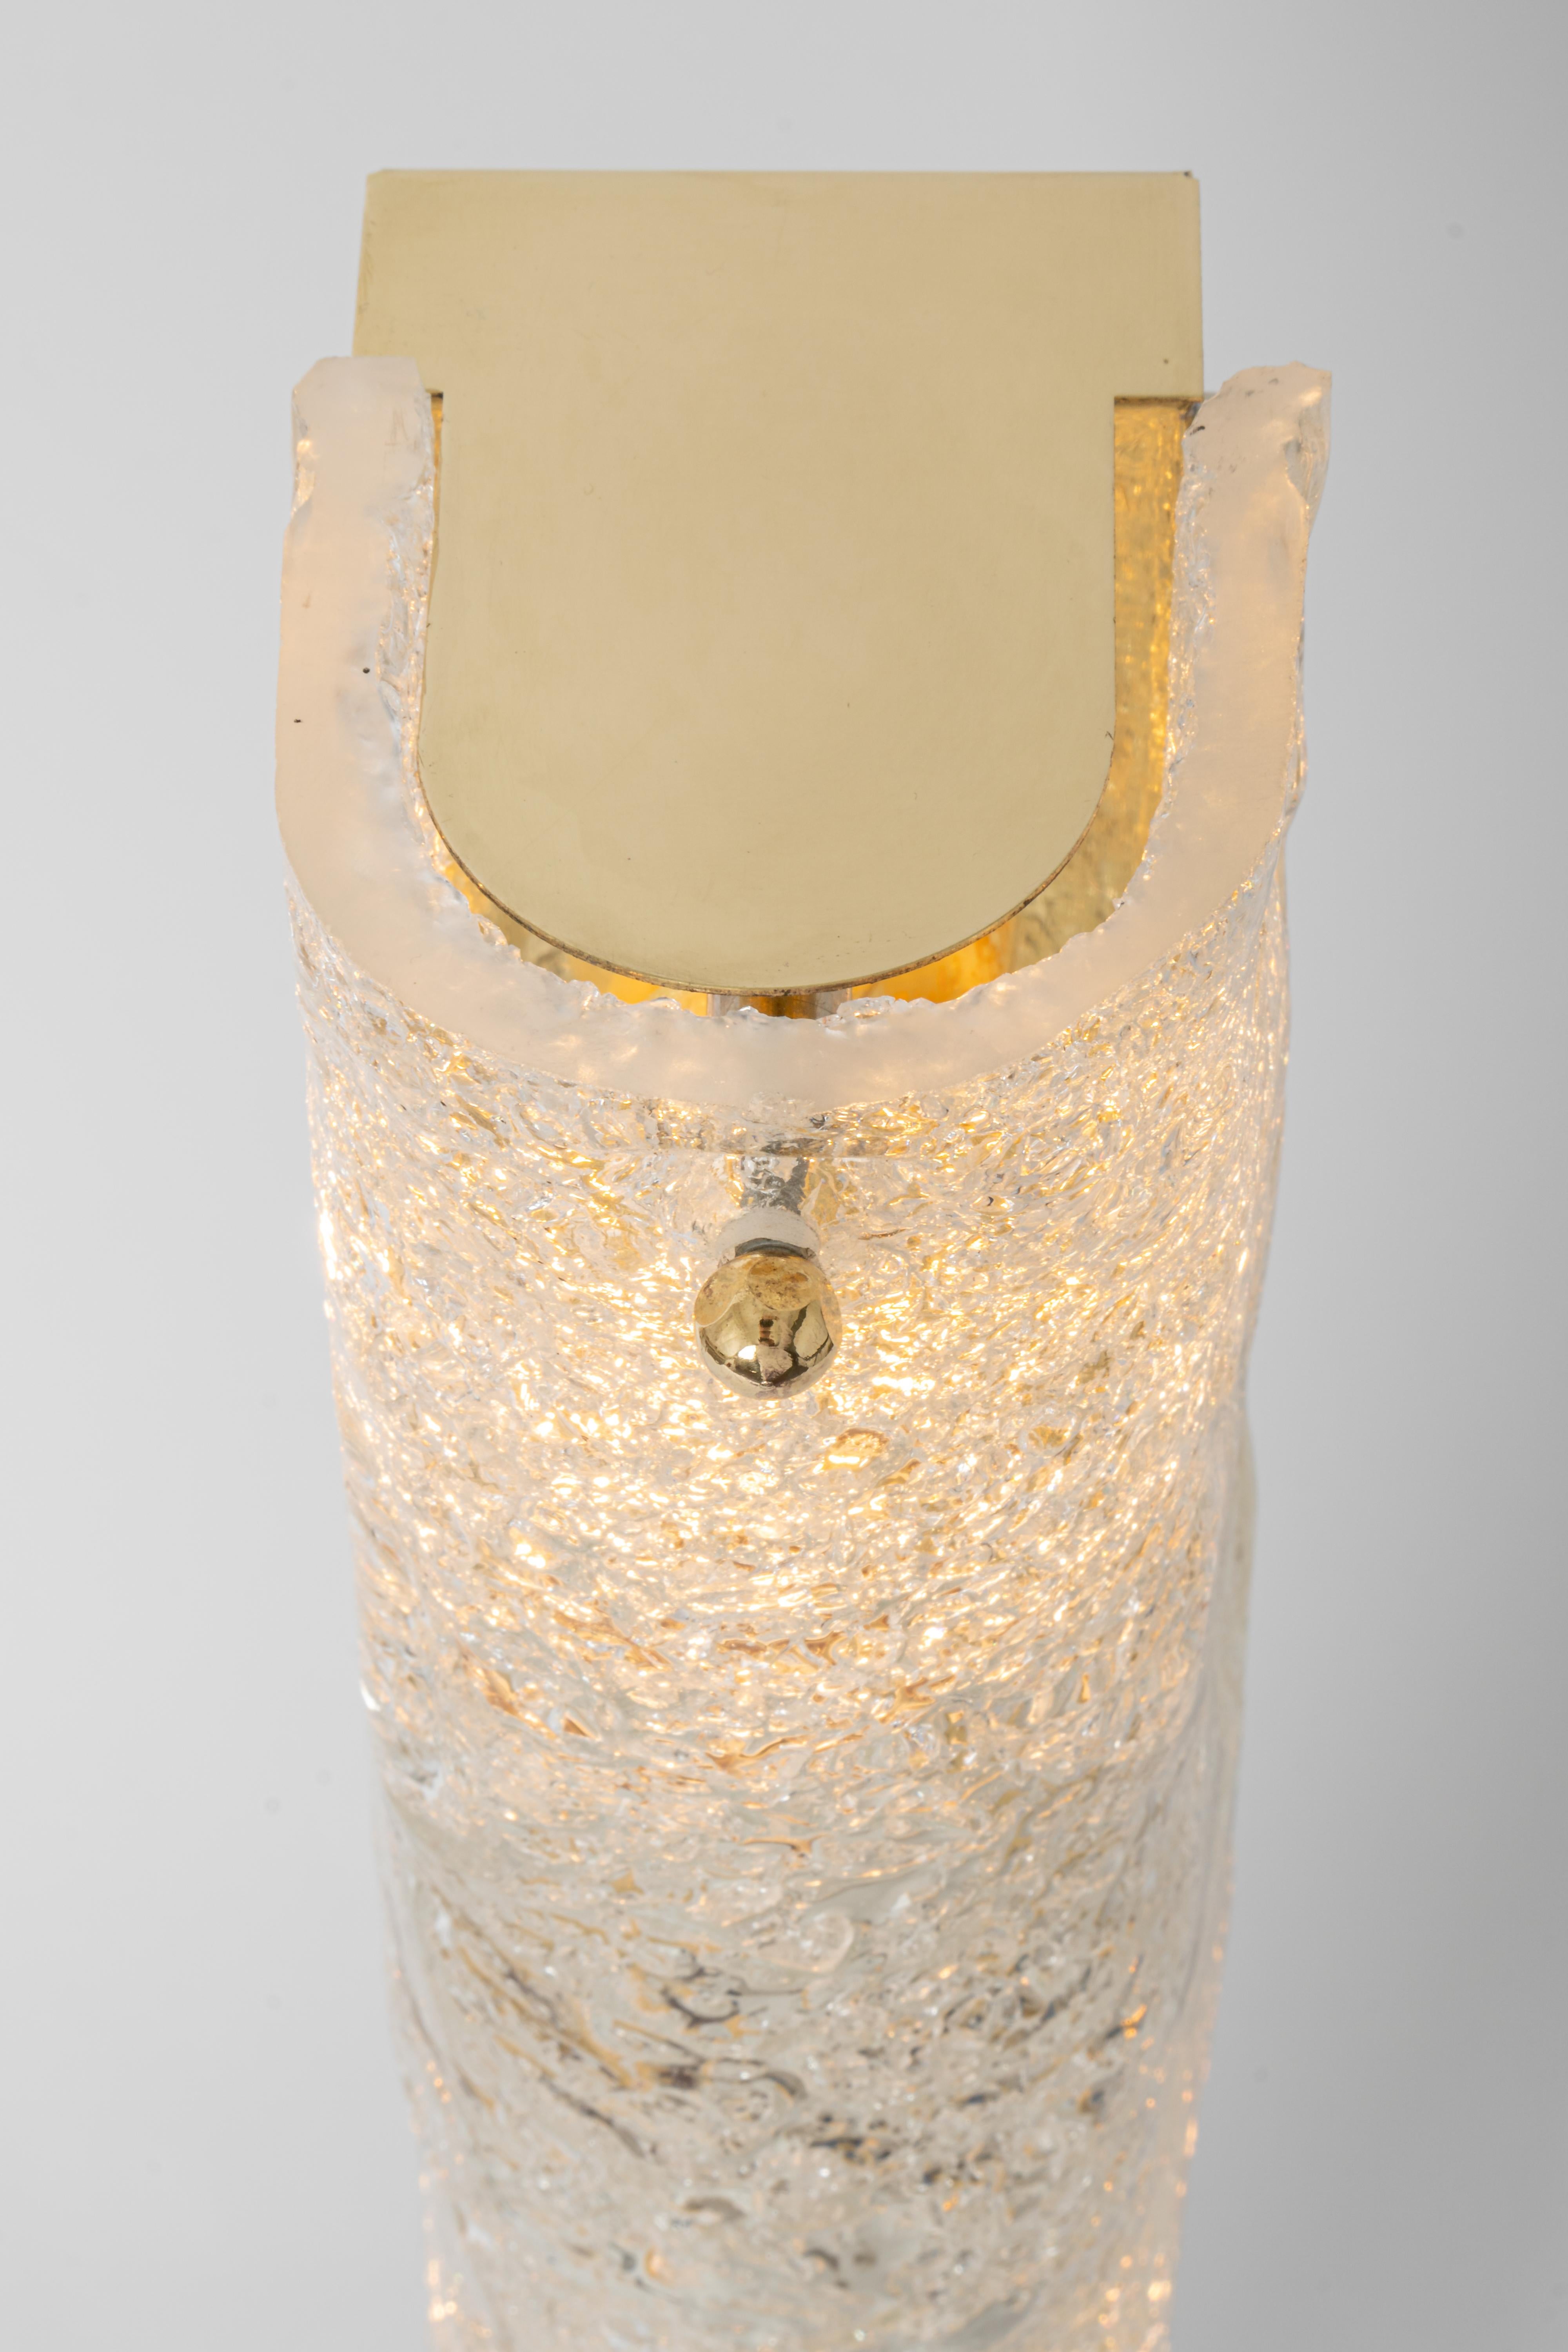 Mid-Century Modern 1 of 2 Pairs of Large Murano Glass Sconces Modernist Wall Light, Germany, 1960s For Sale